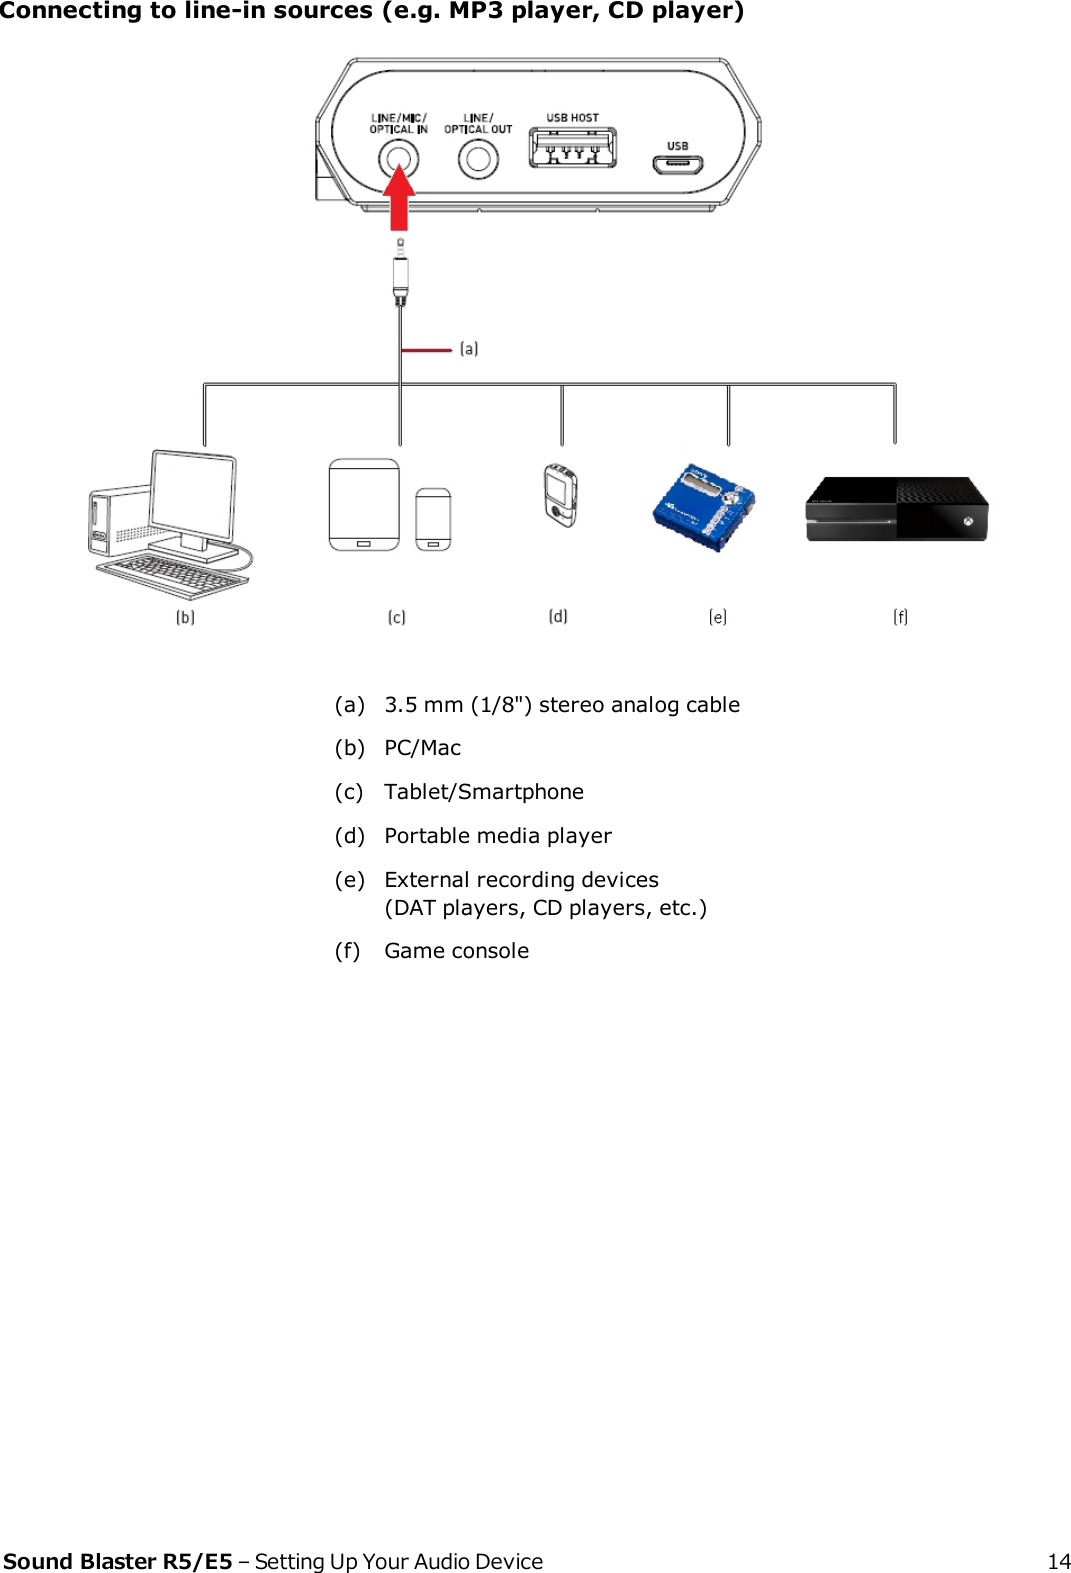 Connecting to line-in sources (e.g. MP3 player, CD player)(a) 3.5 mm (1/8&quot;) stereo analog cable(b) PC/Mac(c) Tablet/Smartphone(d) Portable media player(e) External recording devices(DAT players, CD players, etc.)(f) Game consoleSound Blaster R5/E5 – Setting Up Your Audio Device 14